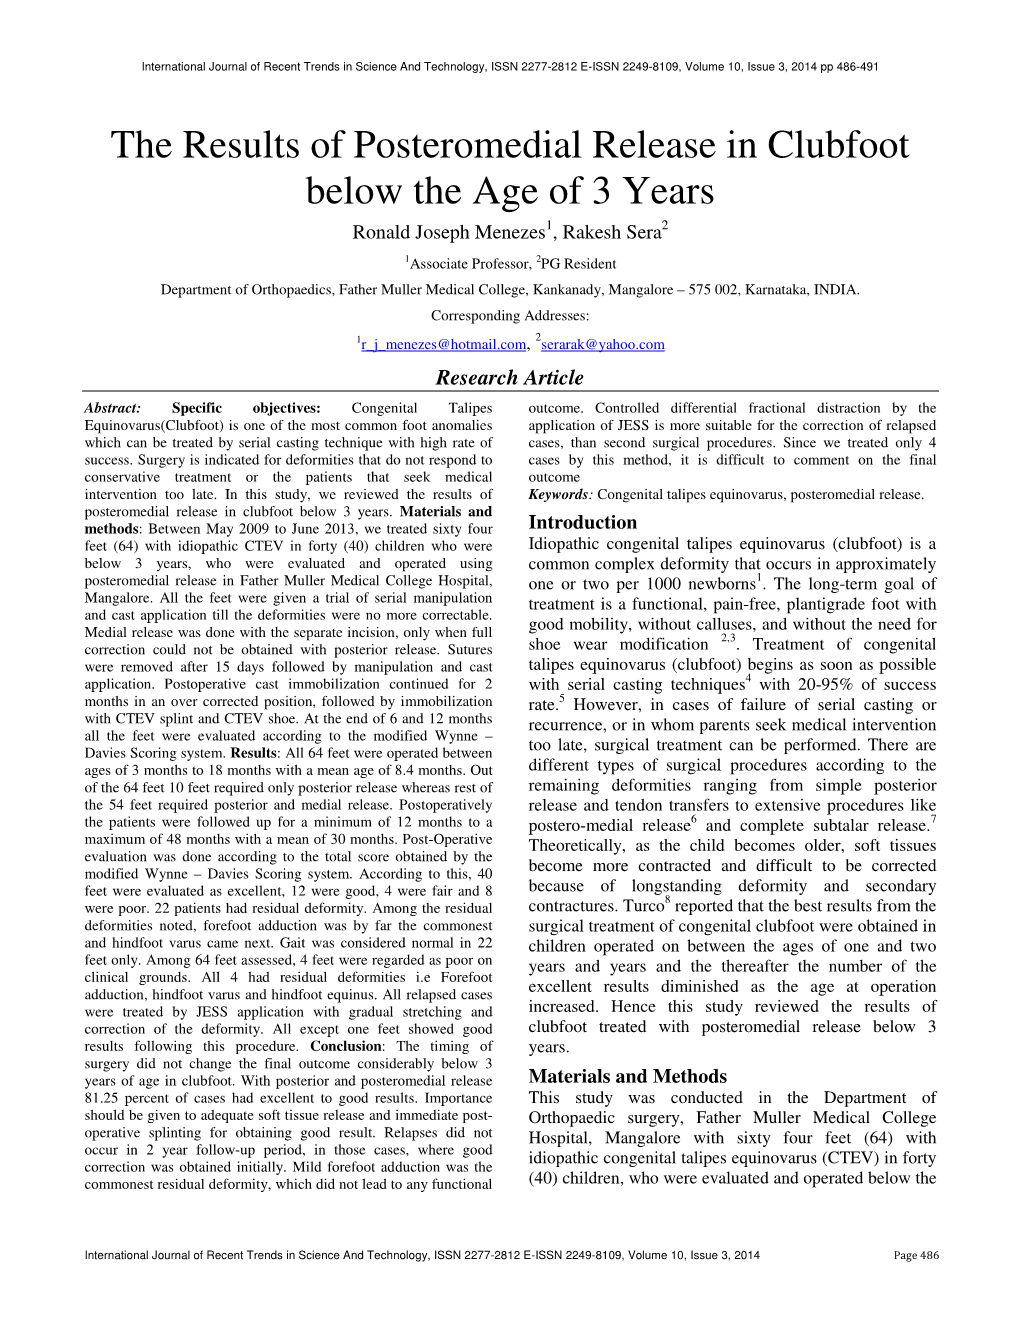 The Results of Posteromedial Release in Clubfoot Below the Age of 3 Years